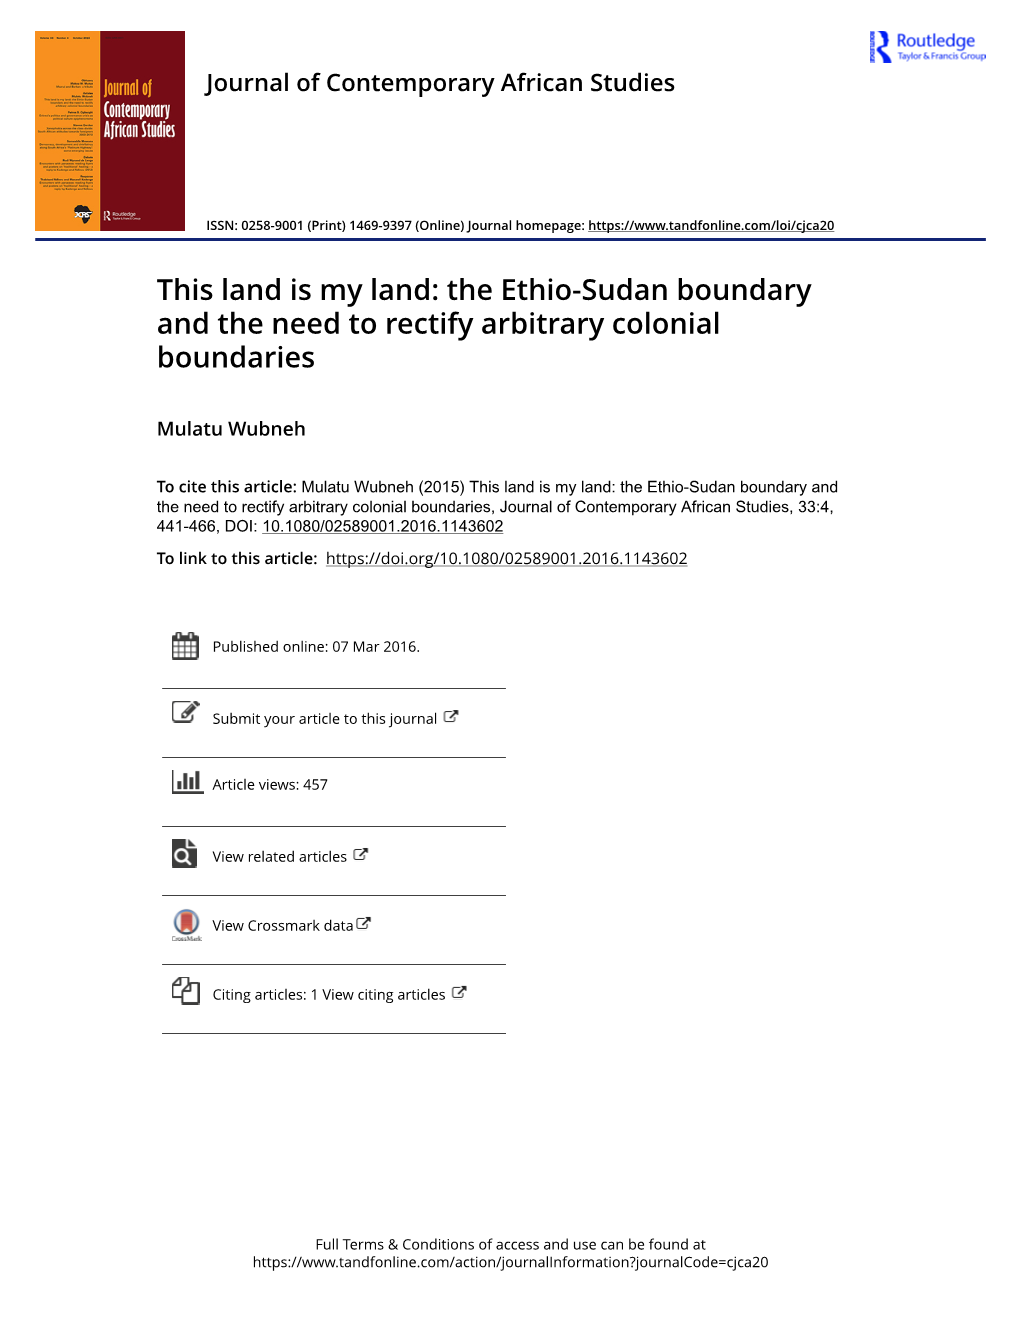 The Ethio-Sudan Boundary and the Need to Rectify Arbitrary Colonial Boundaries